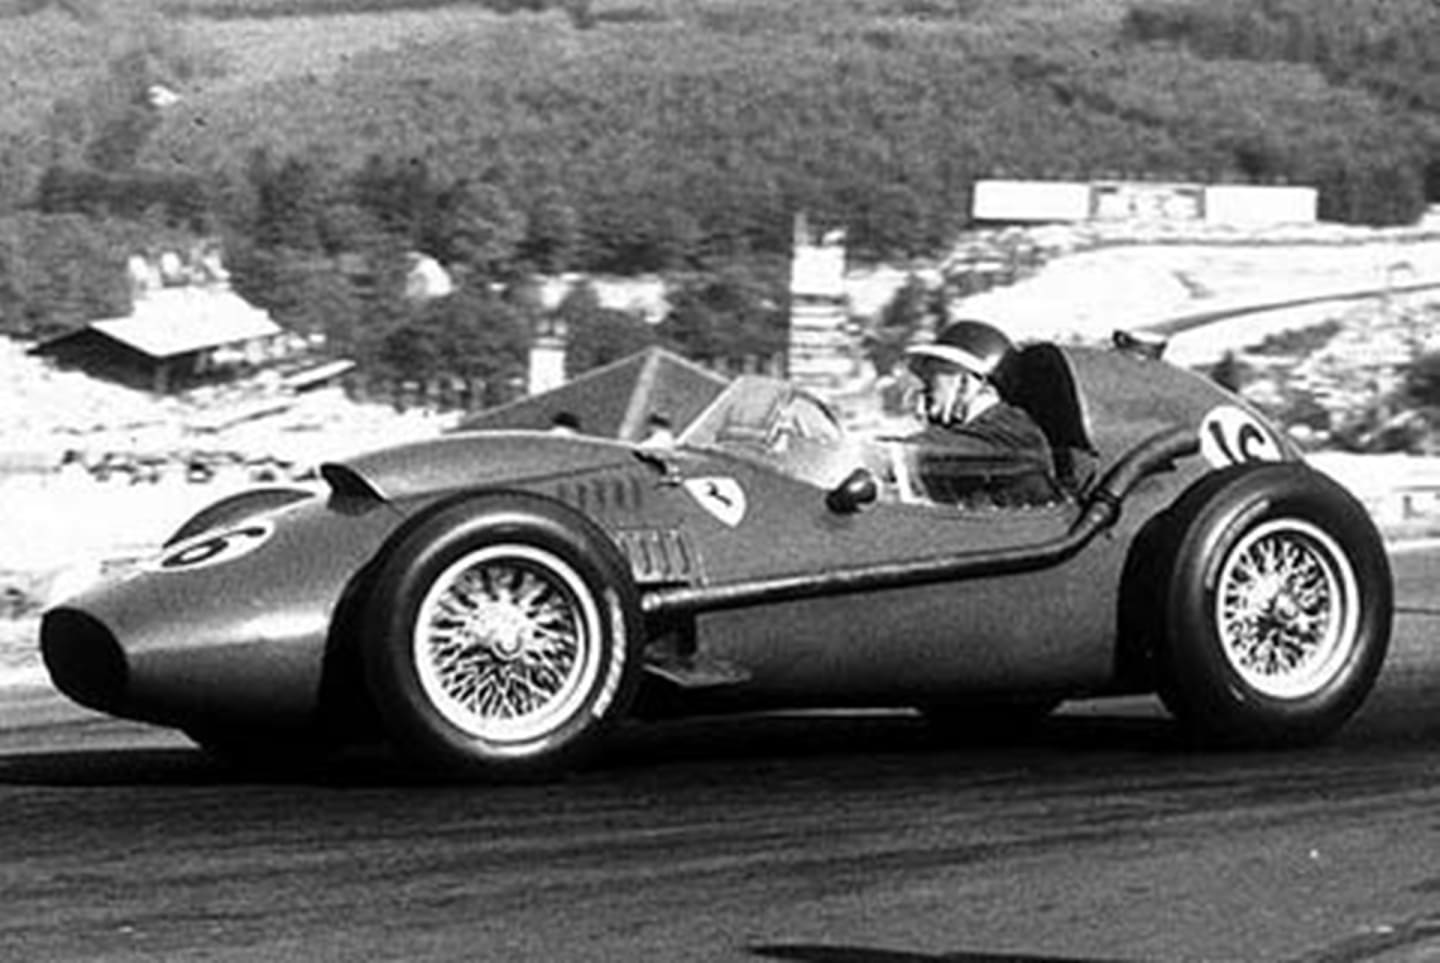 Spa, June 1958: Hawthorn wrestles with the wheel of his Ferrari. He took pole position and fastest